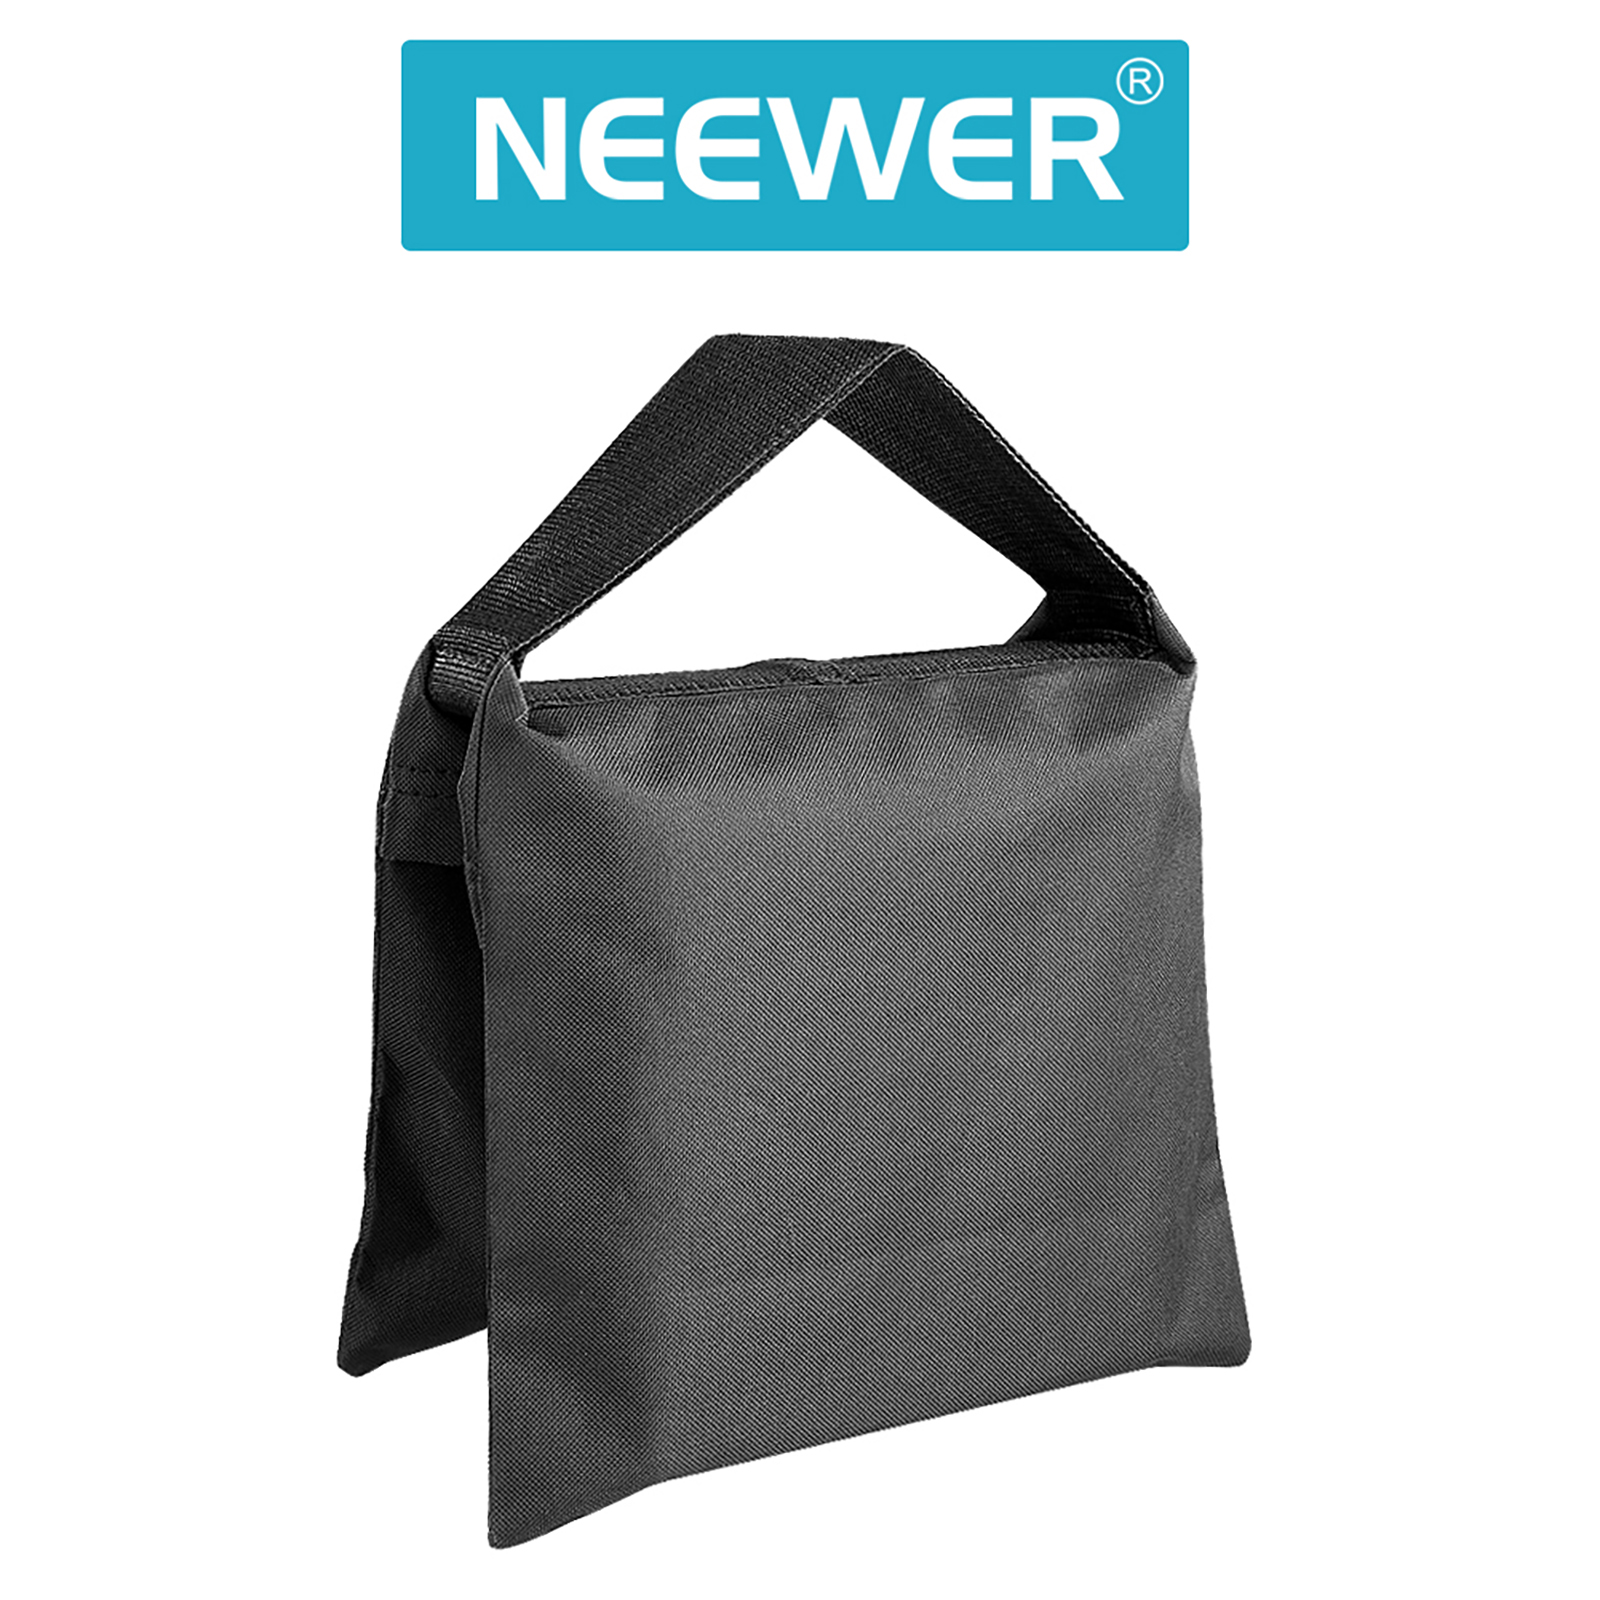 Neewer Heavy Duty Photographic Studio Sandbags for Light Stands, Boom Stands, Tripod - 4 Packs Set - Bags are EMPTY - image 2 of 2